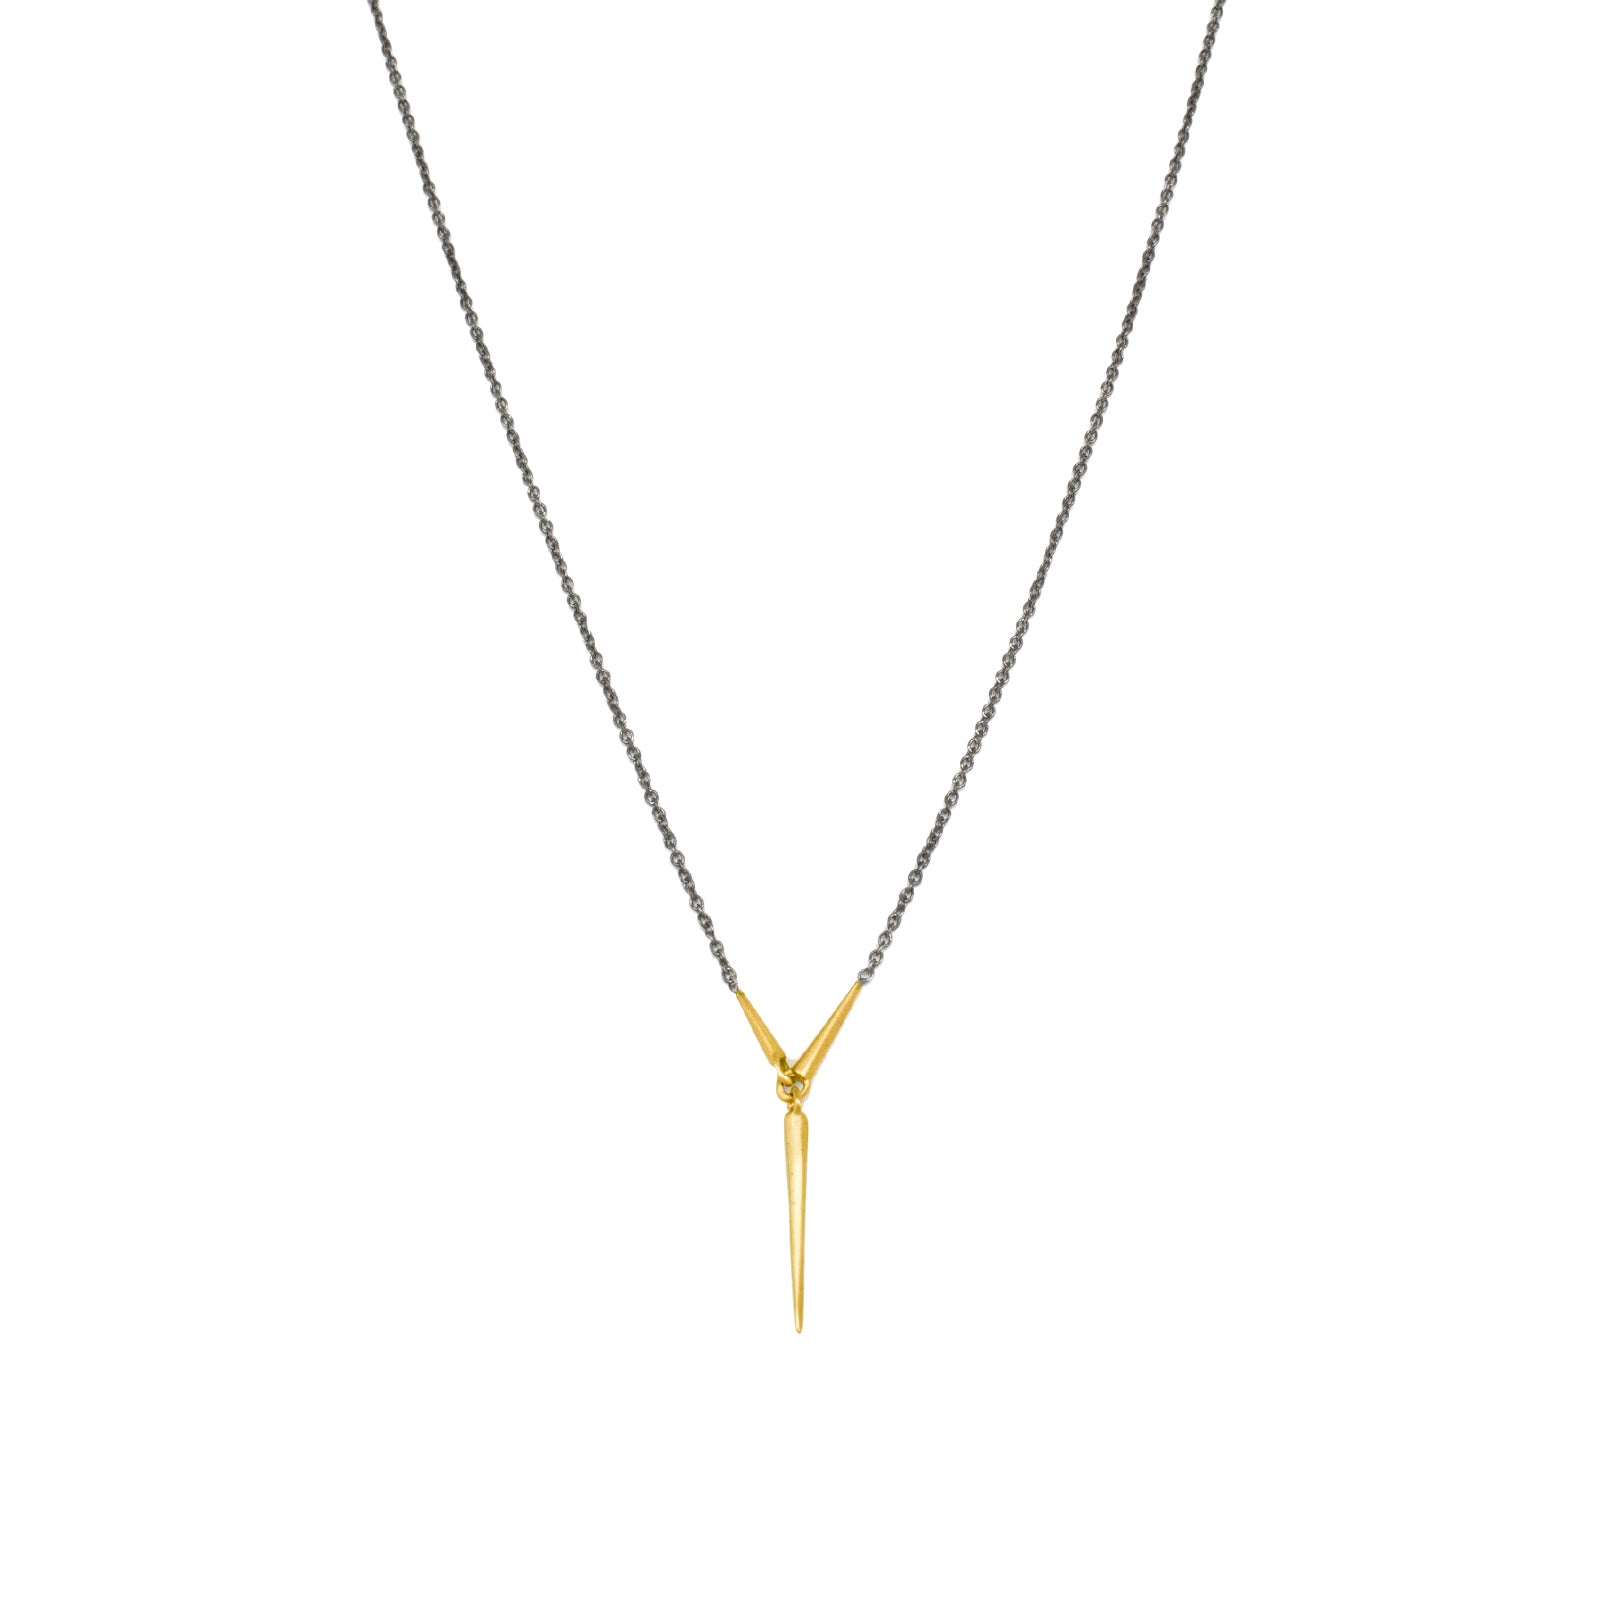 long / 18k yellow gold/oxidized silver chain triad necklace